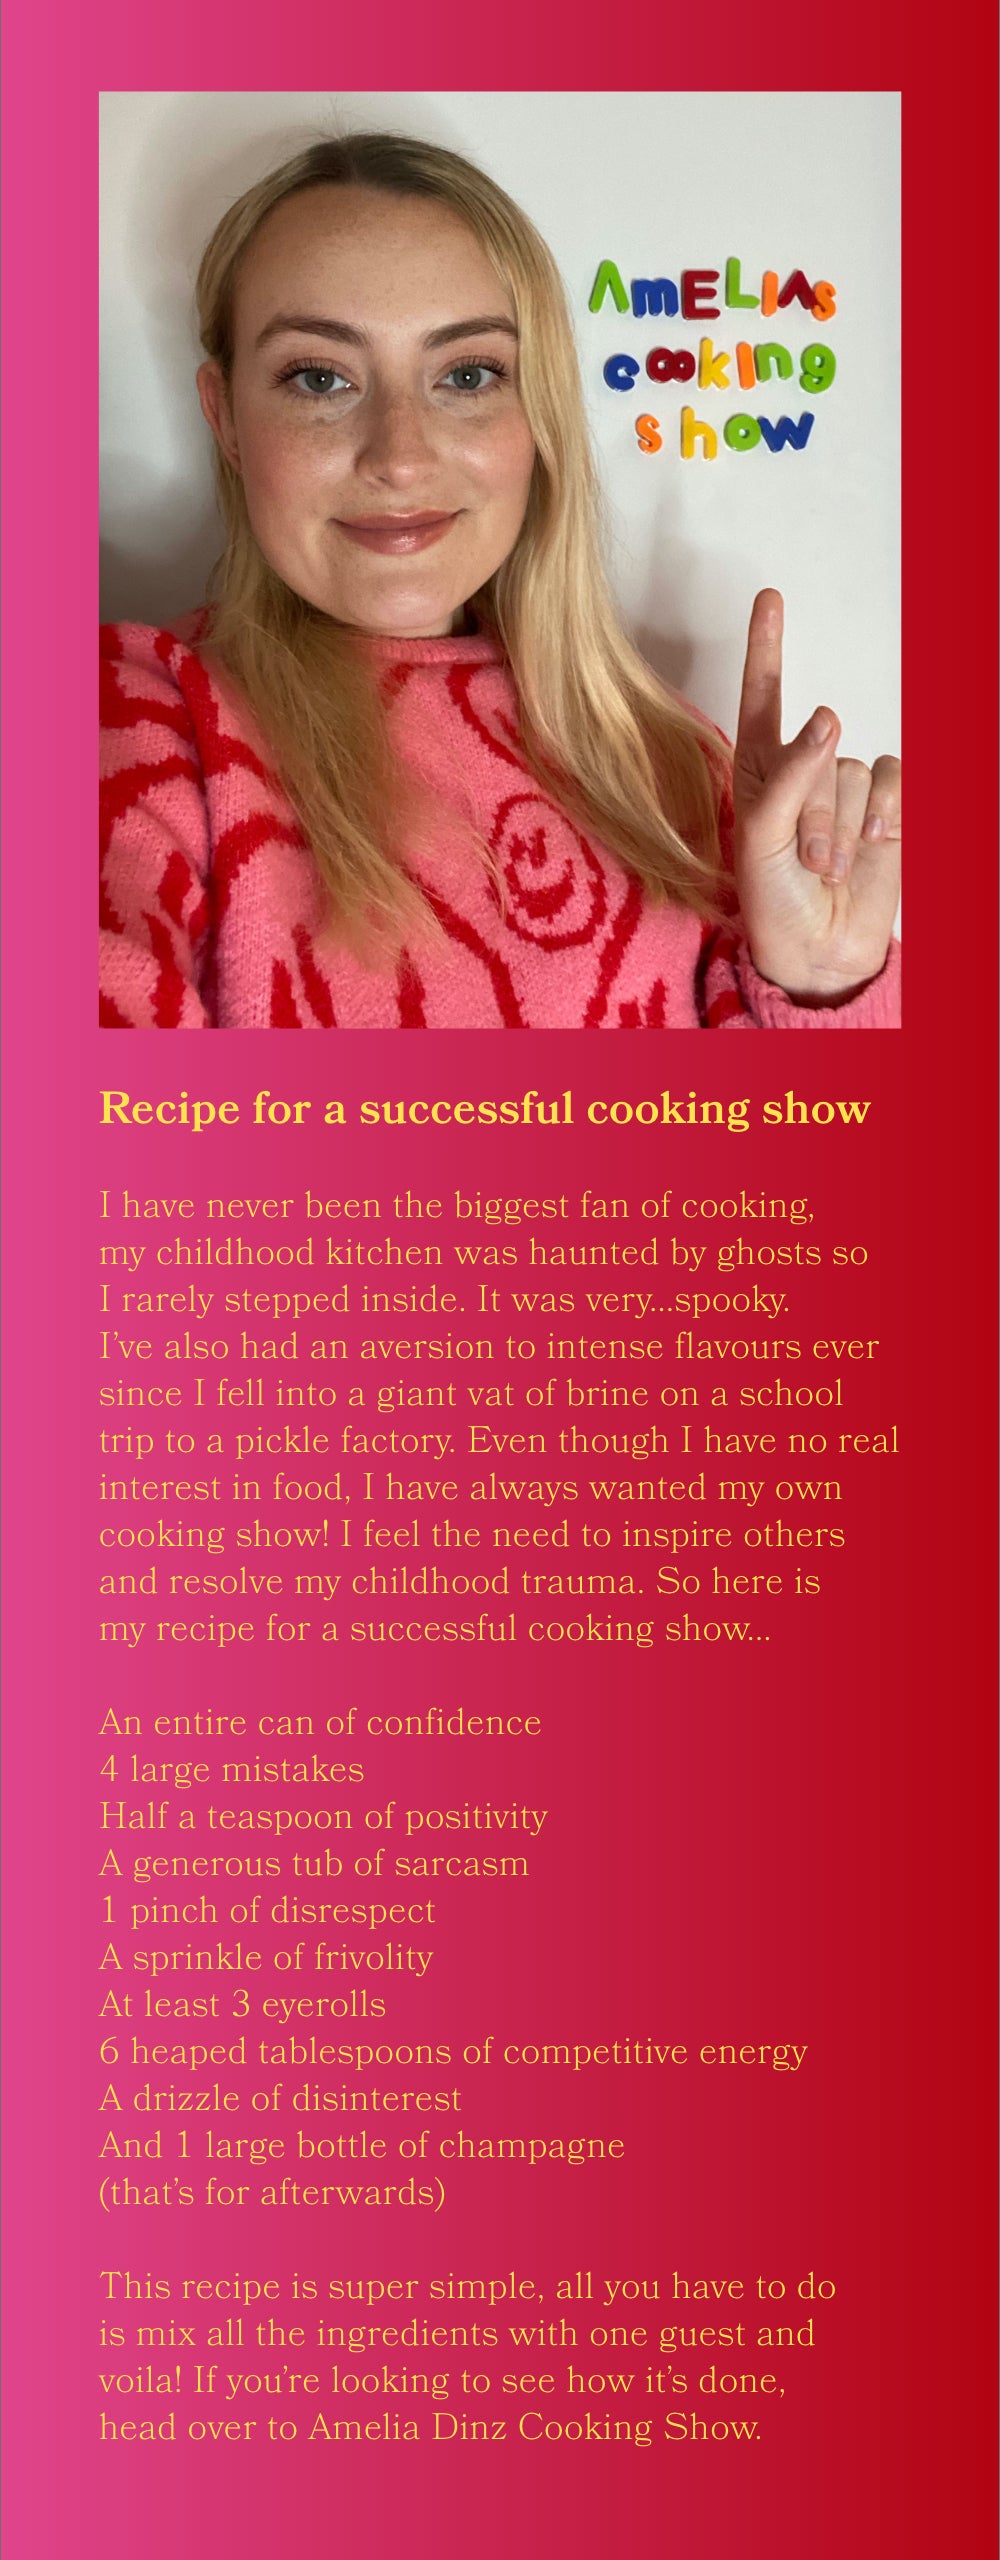 Amelia's cooking show